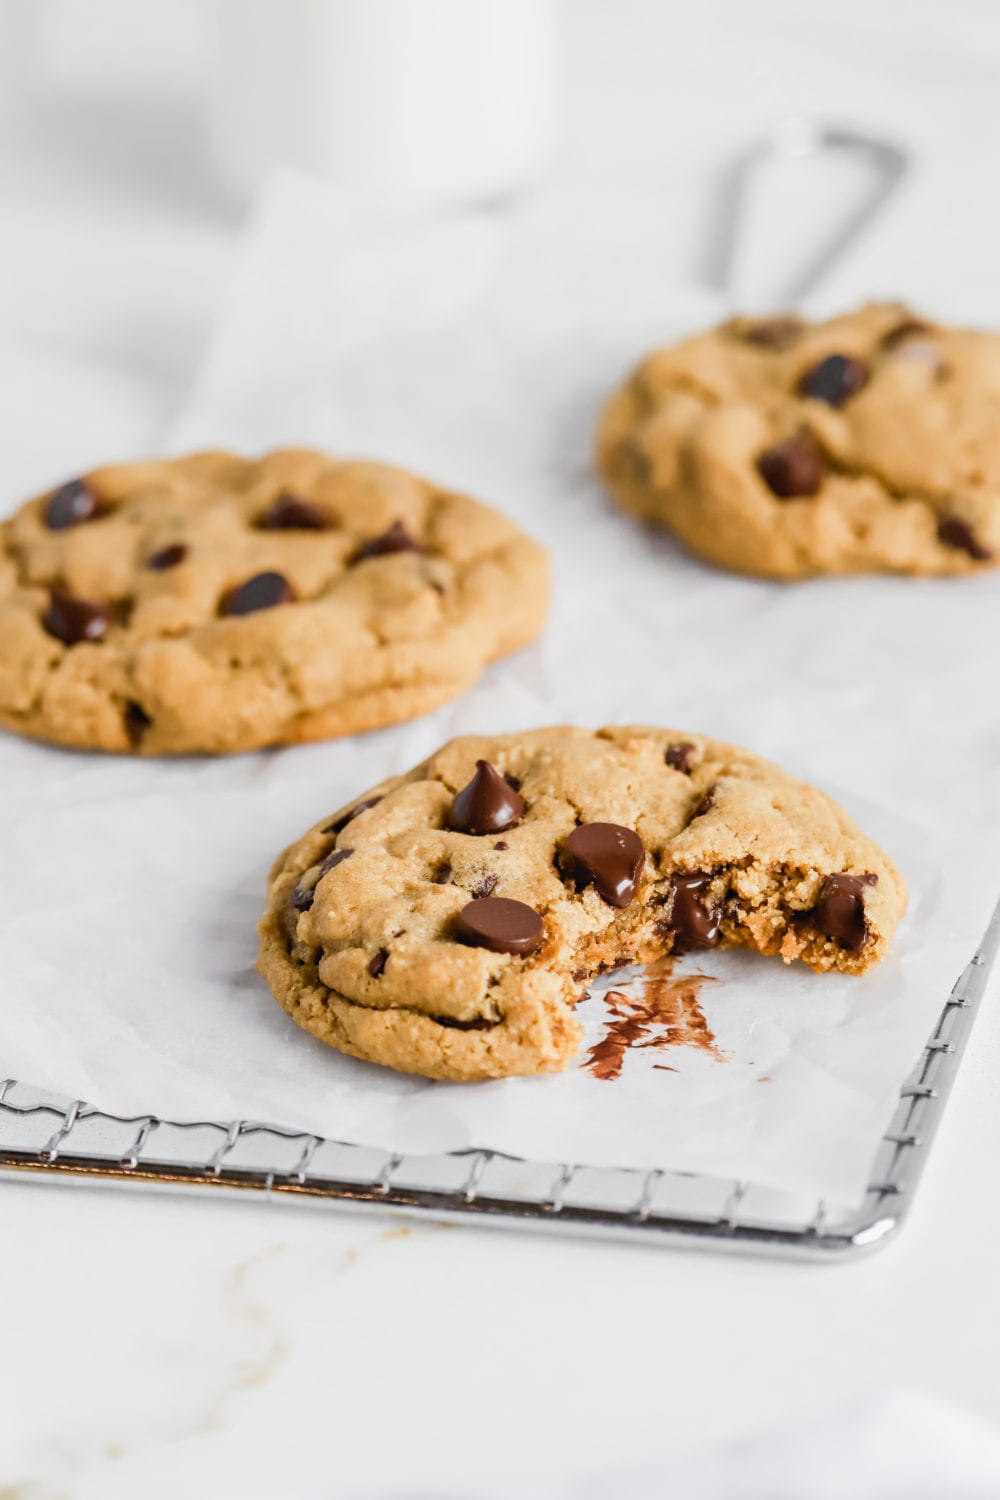 Amazing Chocolate Chip Cookies Recipe (Vegan) - Cookie and Kate